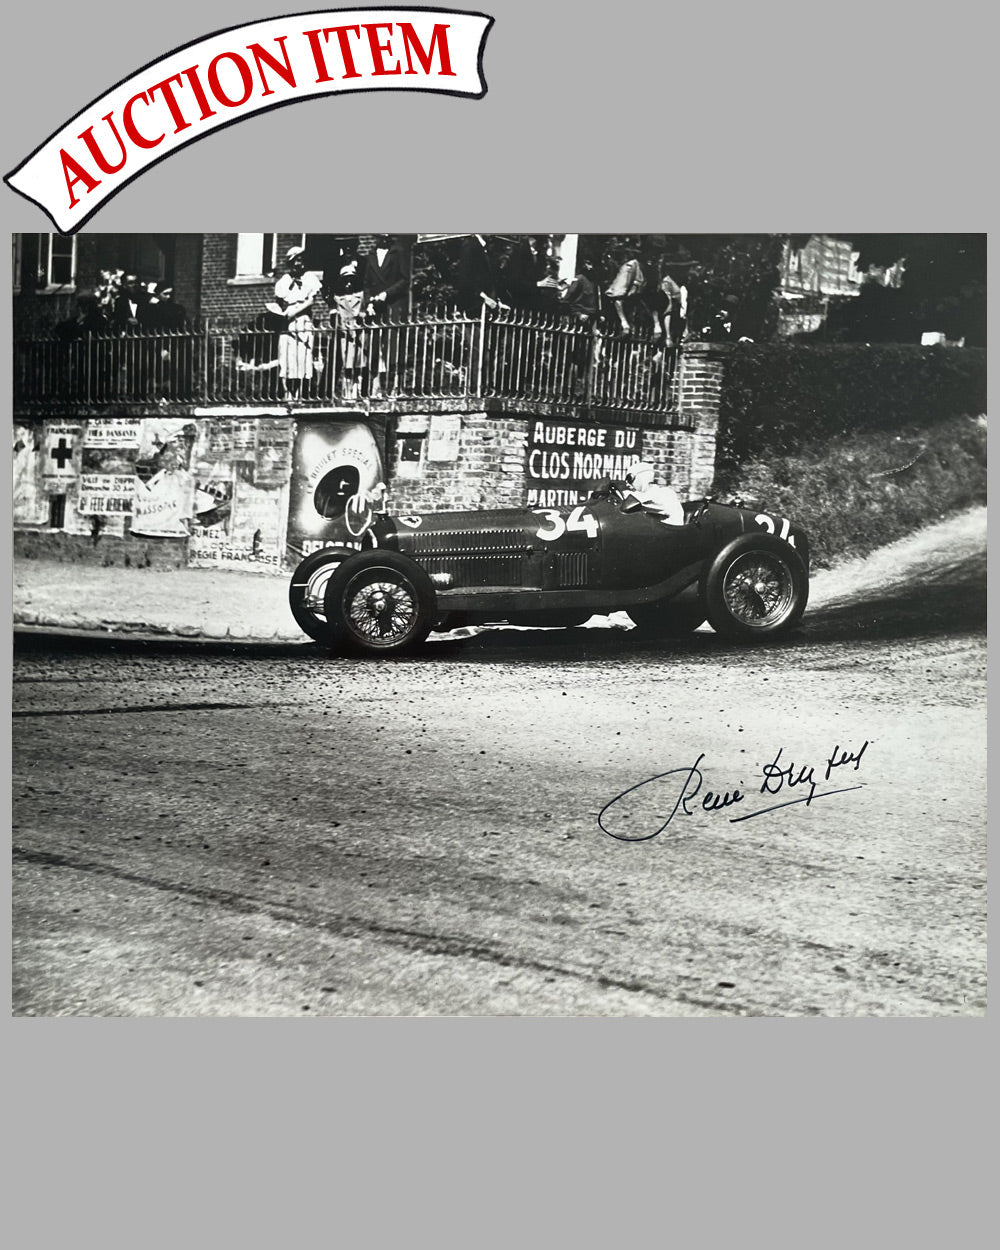 Grand Prix of Dieppe 1935 b&w photograph, hand autographed by Dreyfus